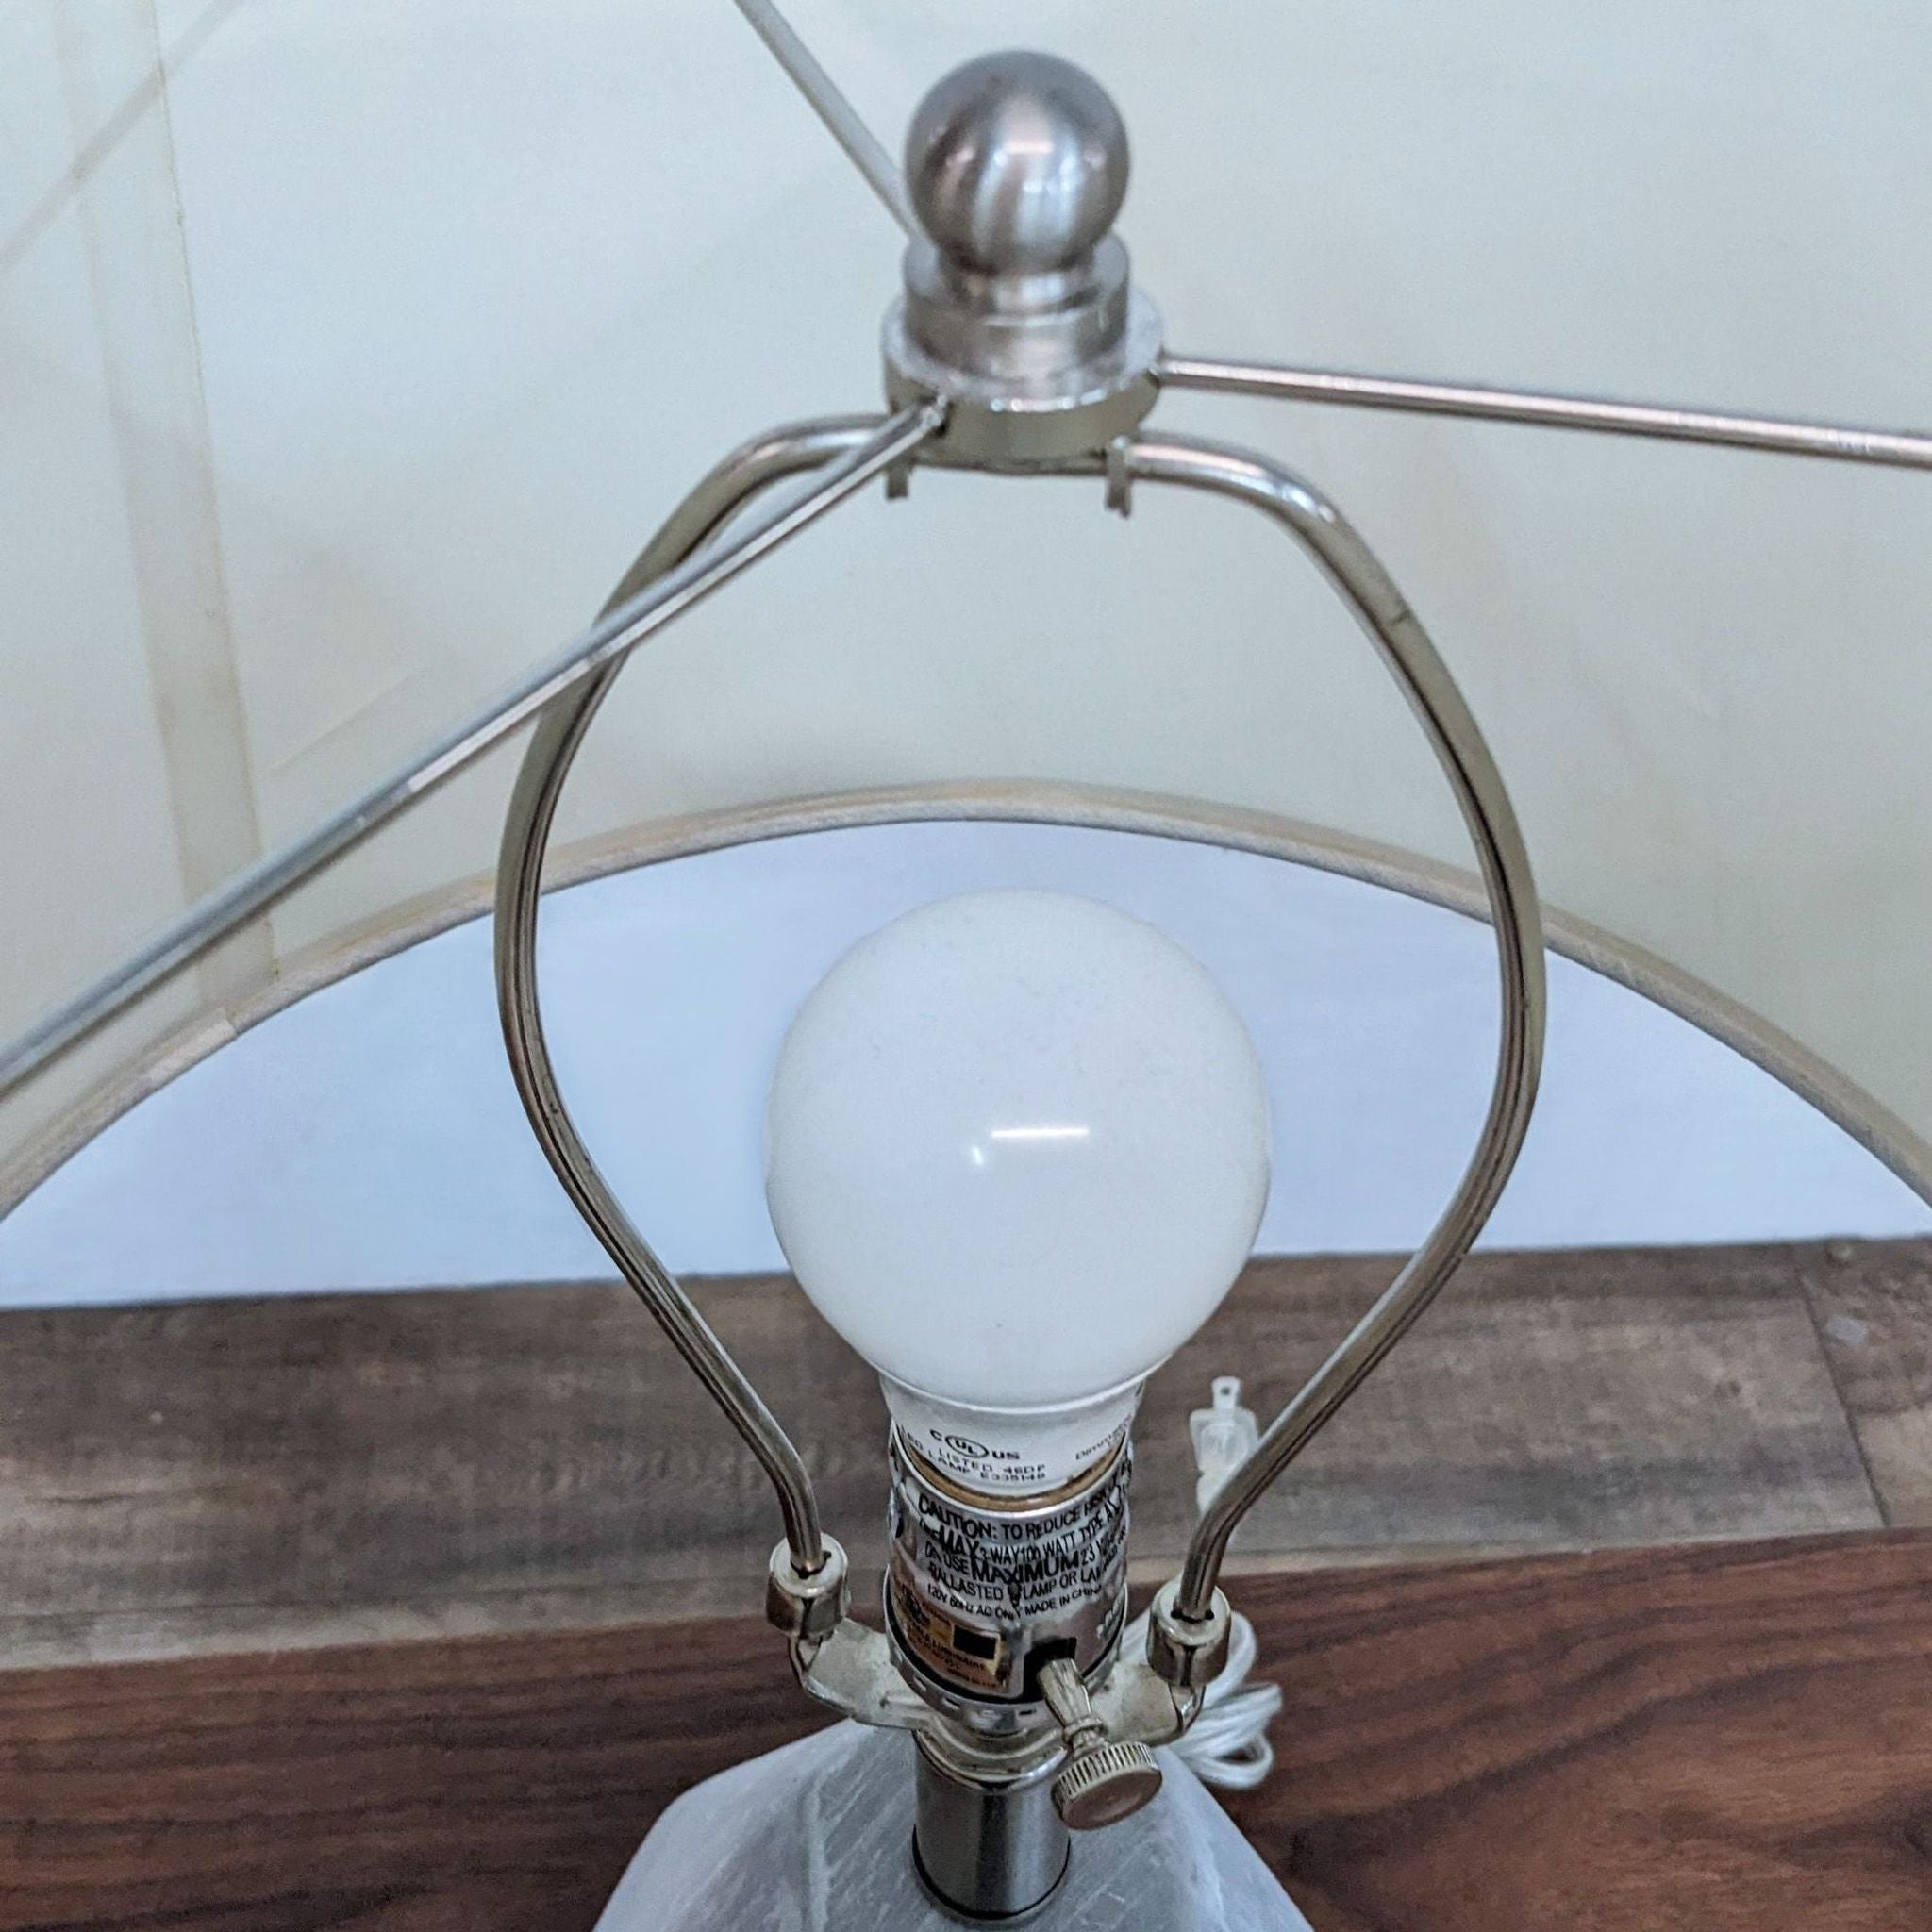 Alt text 2: Close-up of a Surya table lamp showing the bulb and metal frame beneath the shade, with label visible on the mount.